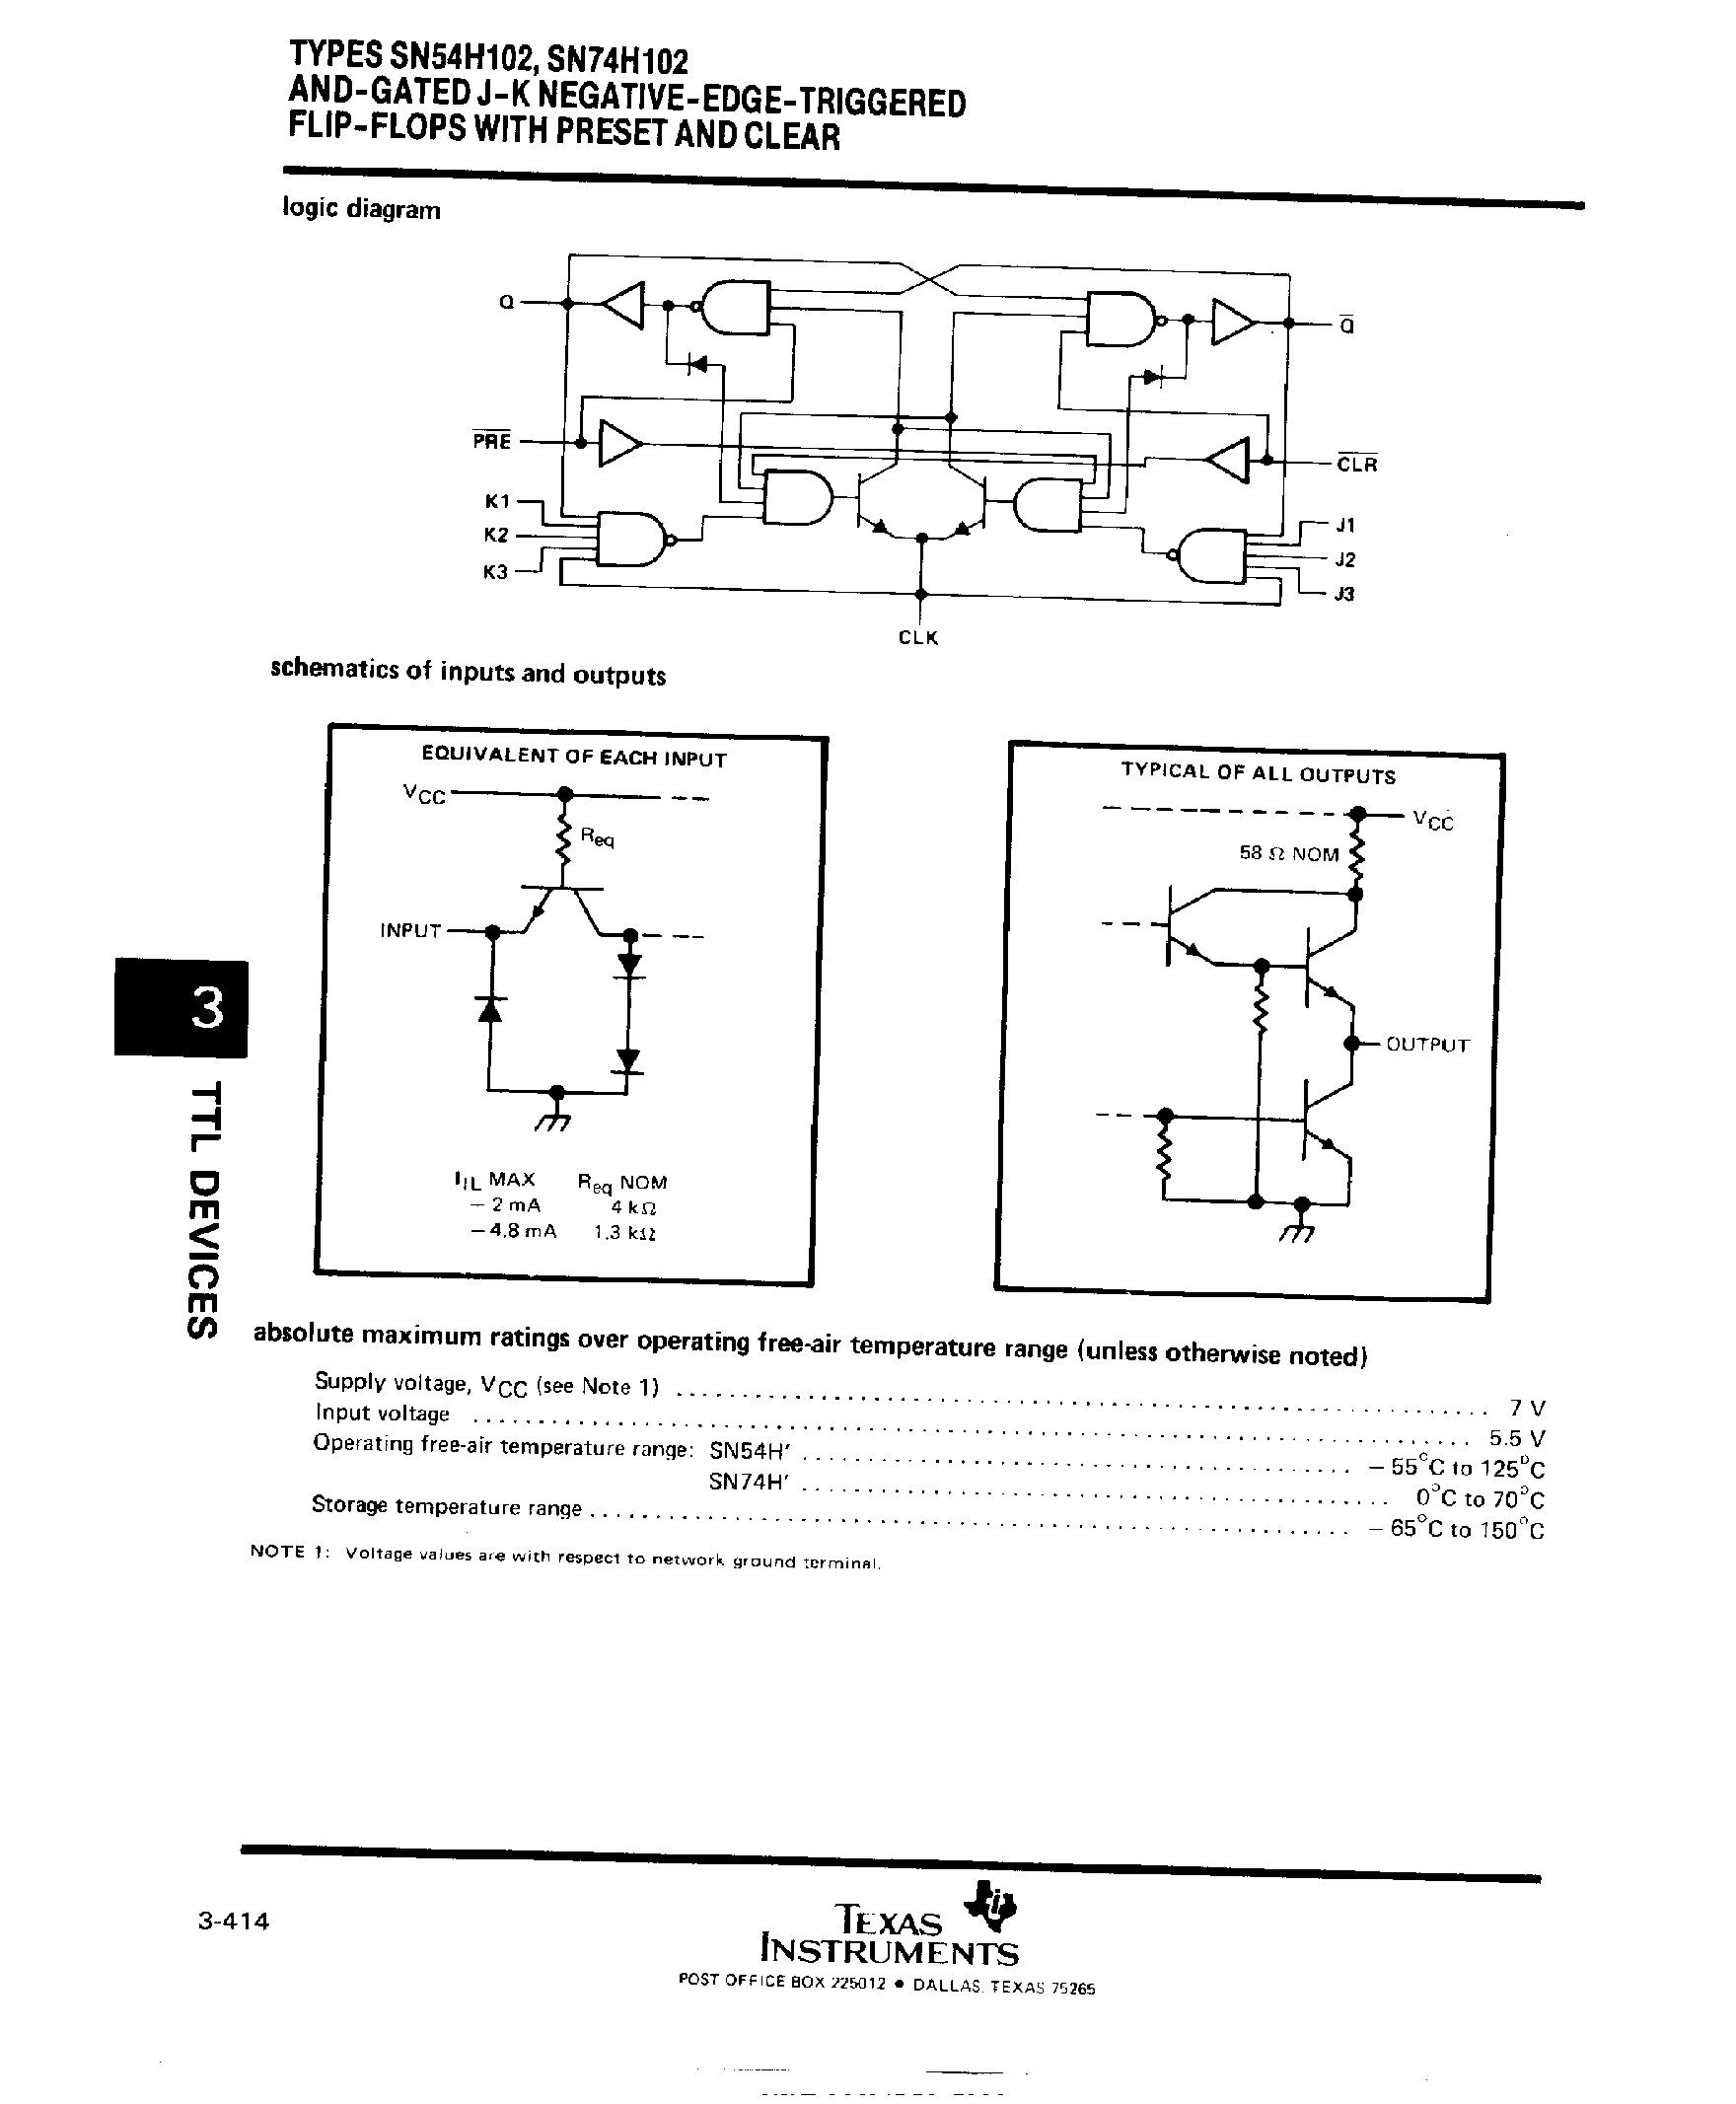 Datasheet SN74H102 - AND Gated J-K Negative EDGE Triggered F-F with Preset and Clear page 2